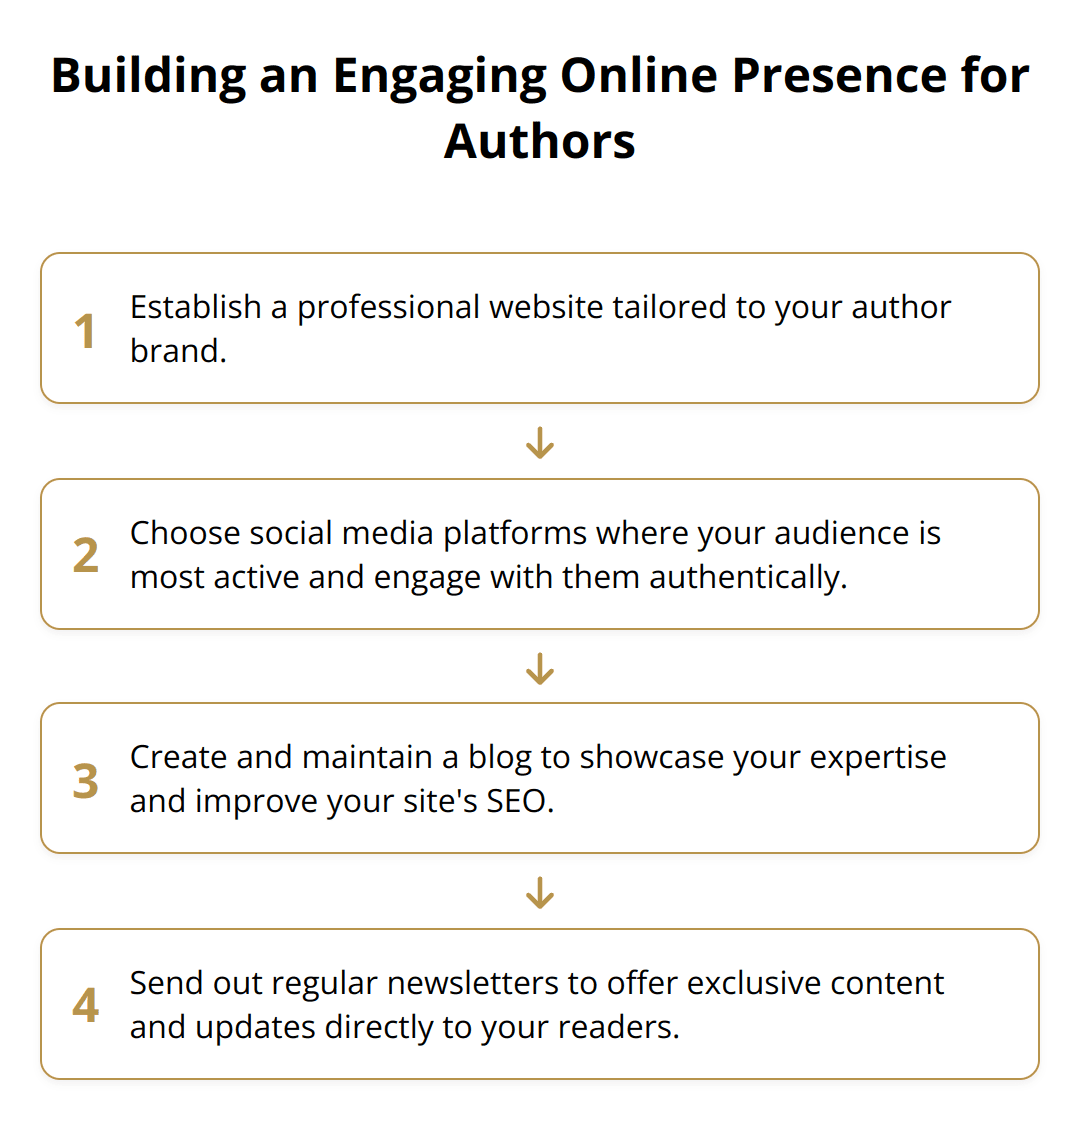 Flow Chart - Building an Engaging Online Presence for Authors